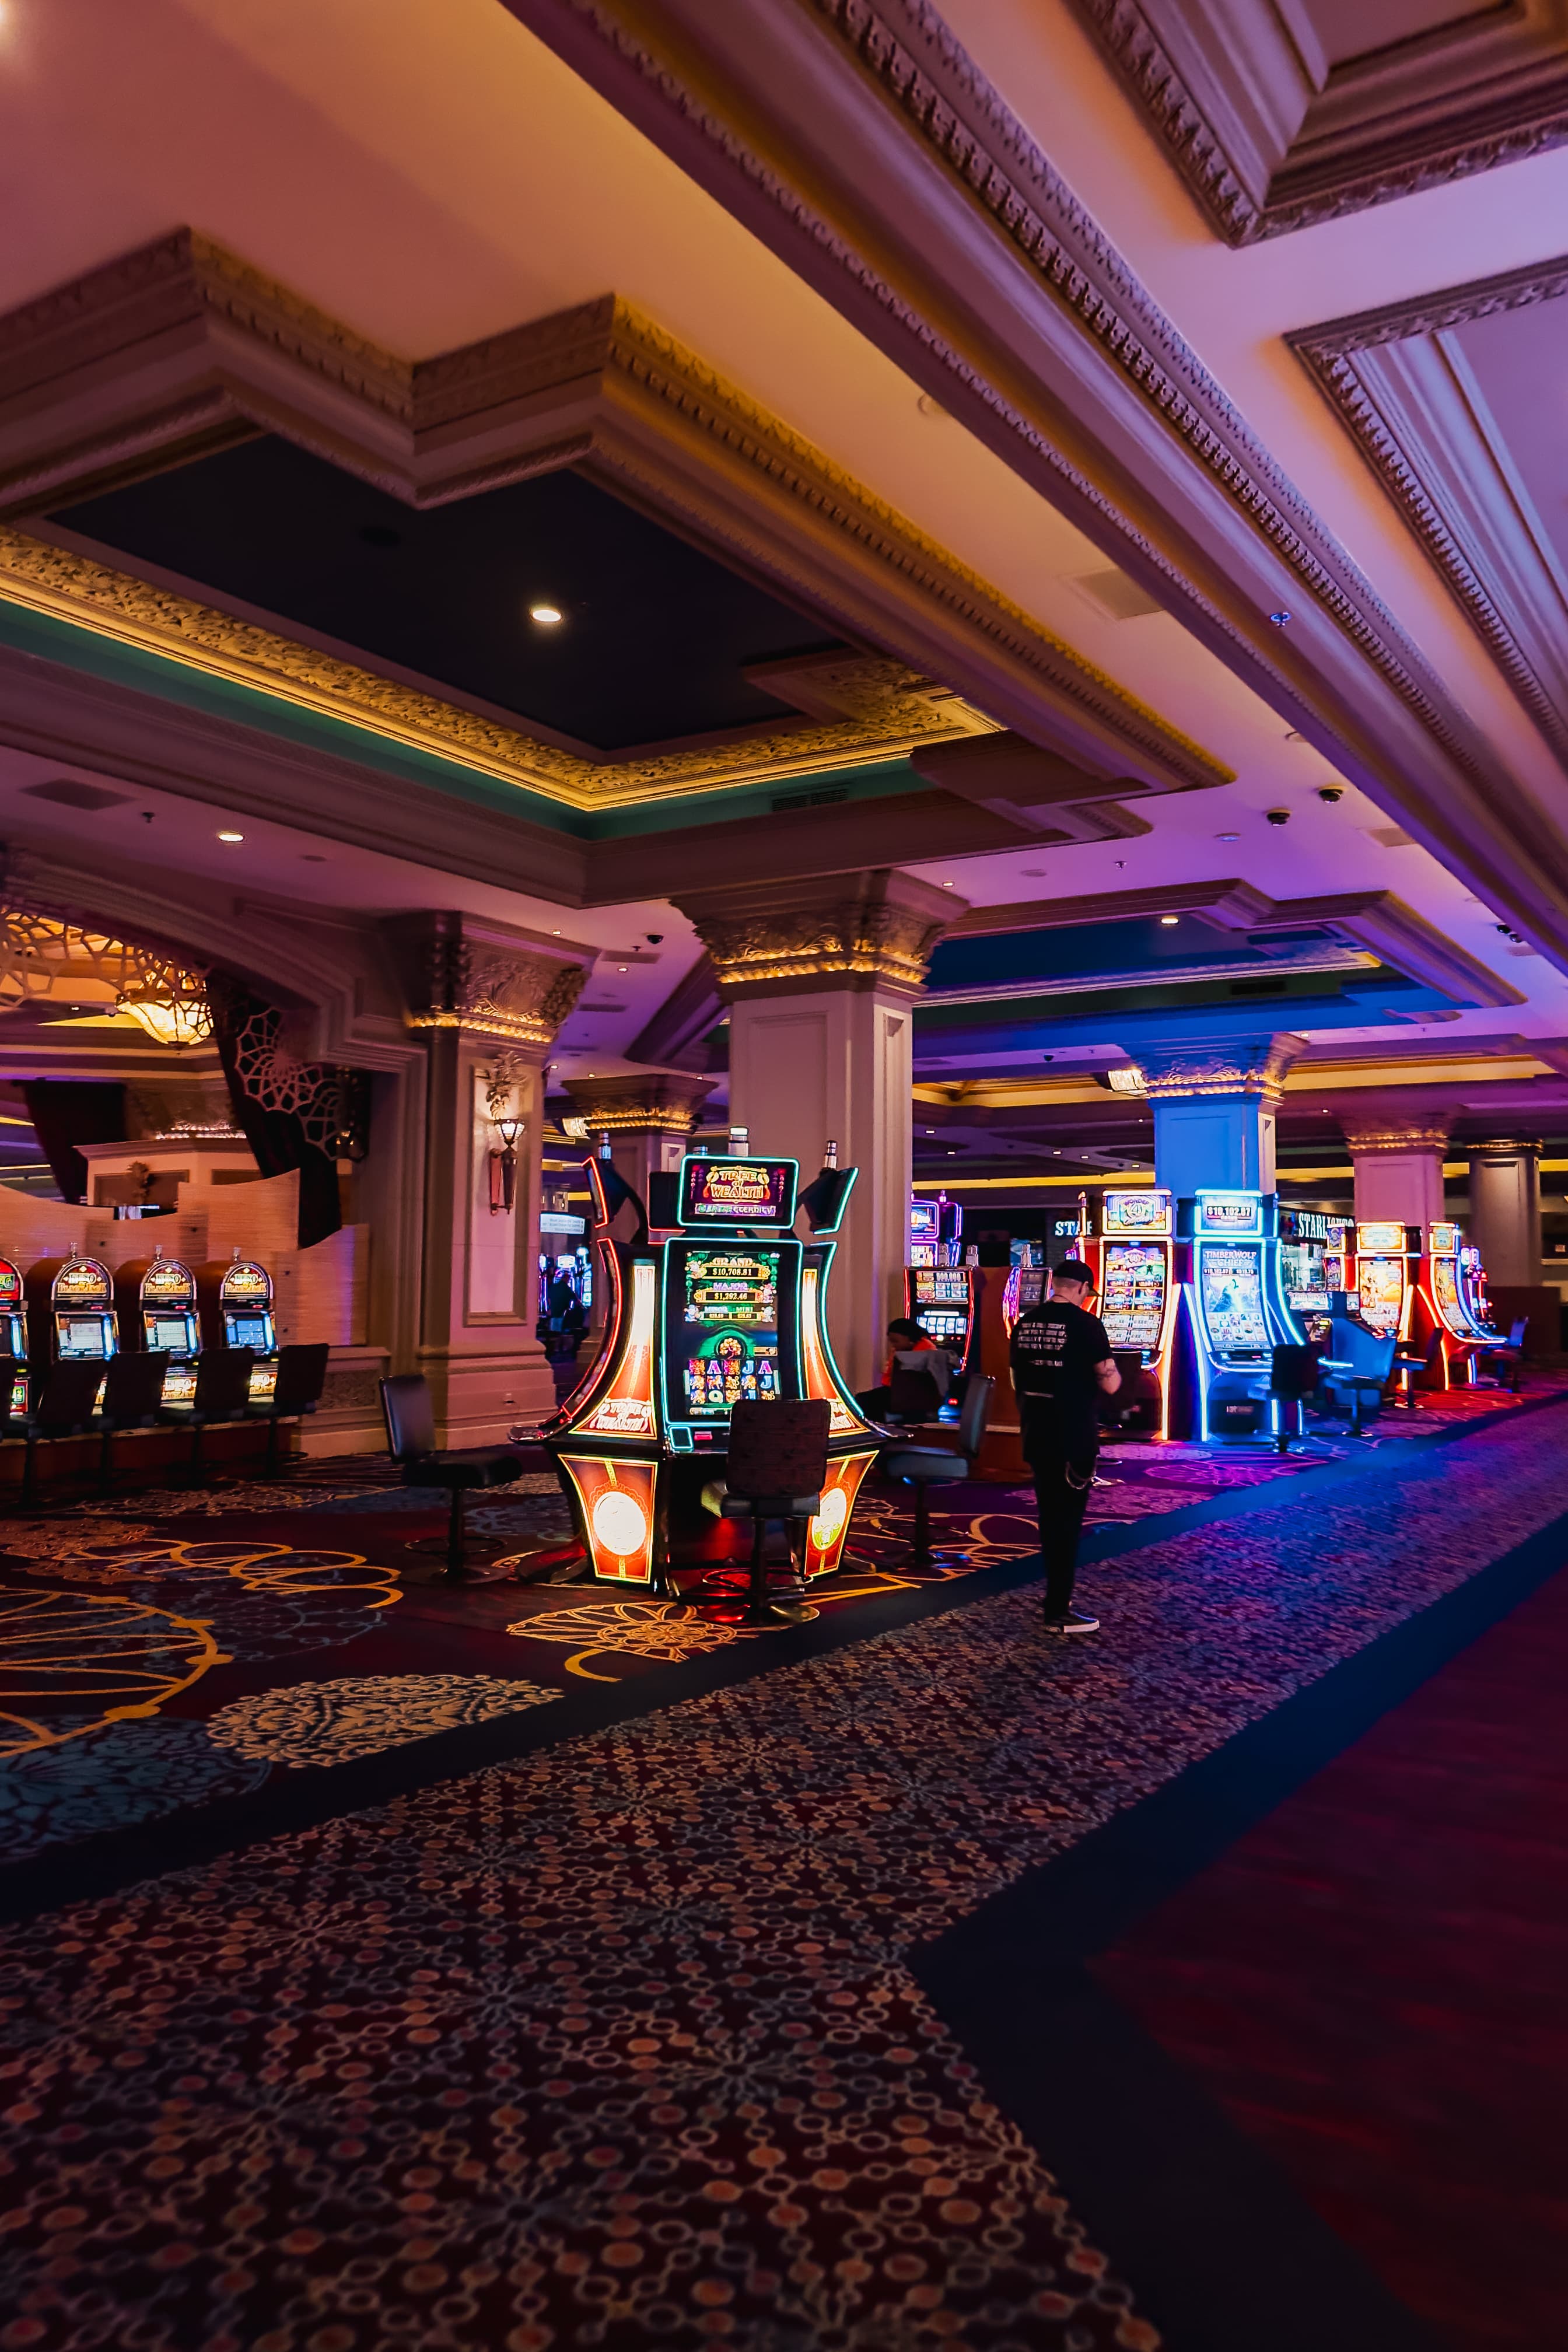 An opulent casino interior with slot machines, ornate columns and ceilings, and vibrant carpeting, conveying the lively atmosphere of a gaming floor.